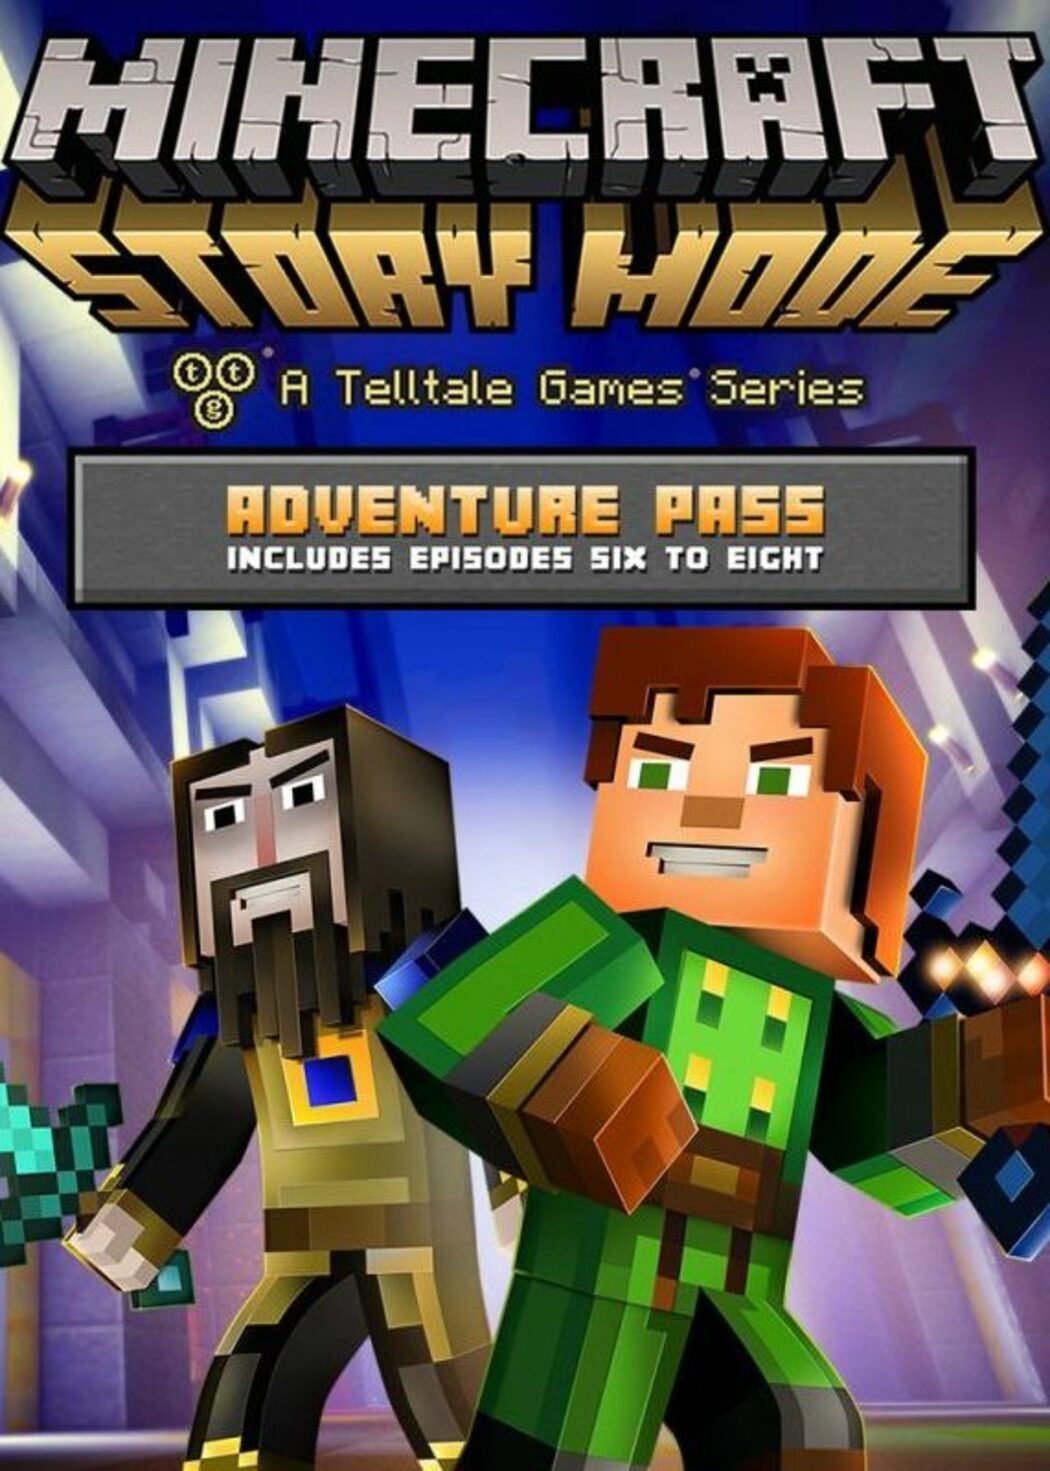 Buy cheap Minecraft: Story Mode - A Telltale Games Series cd key - lowest  price